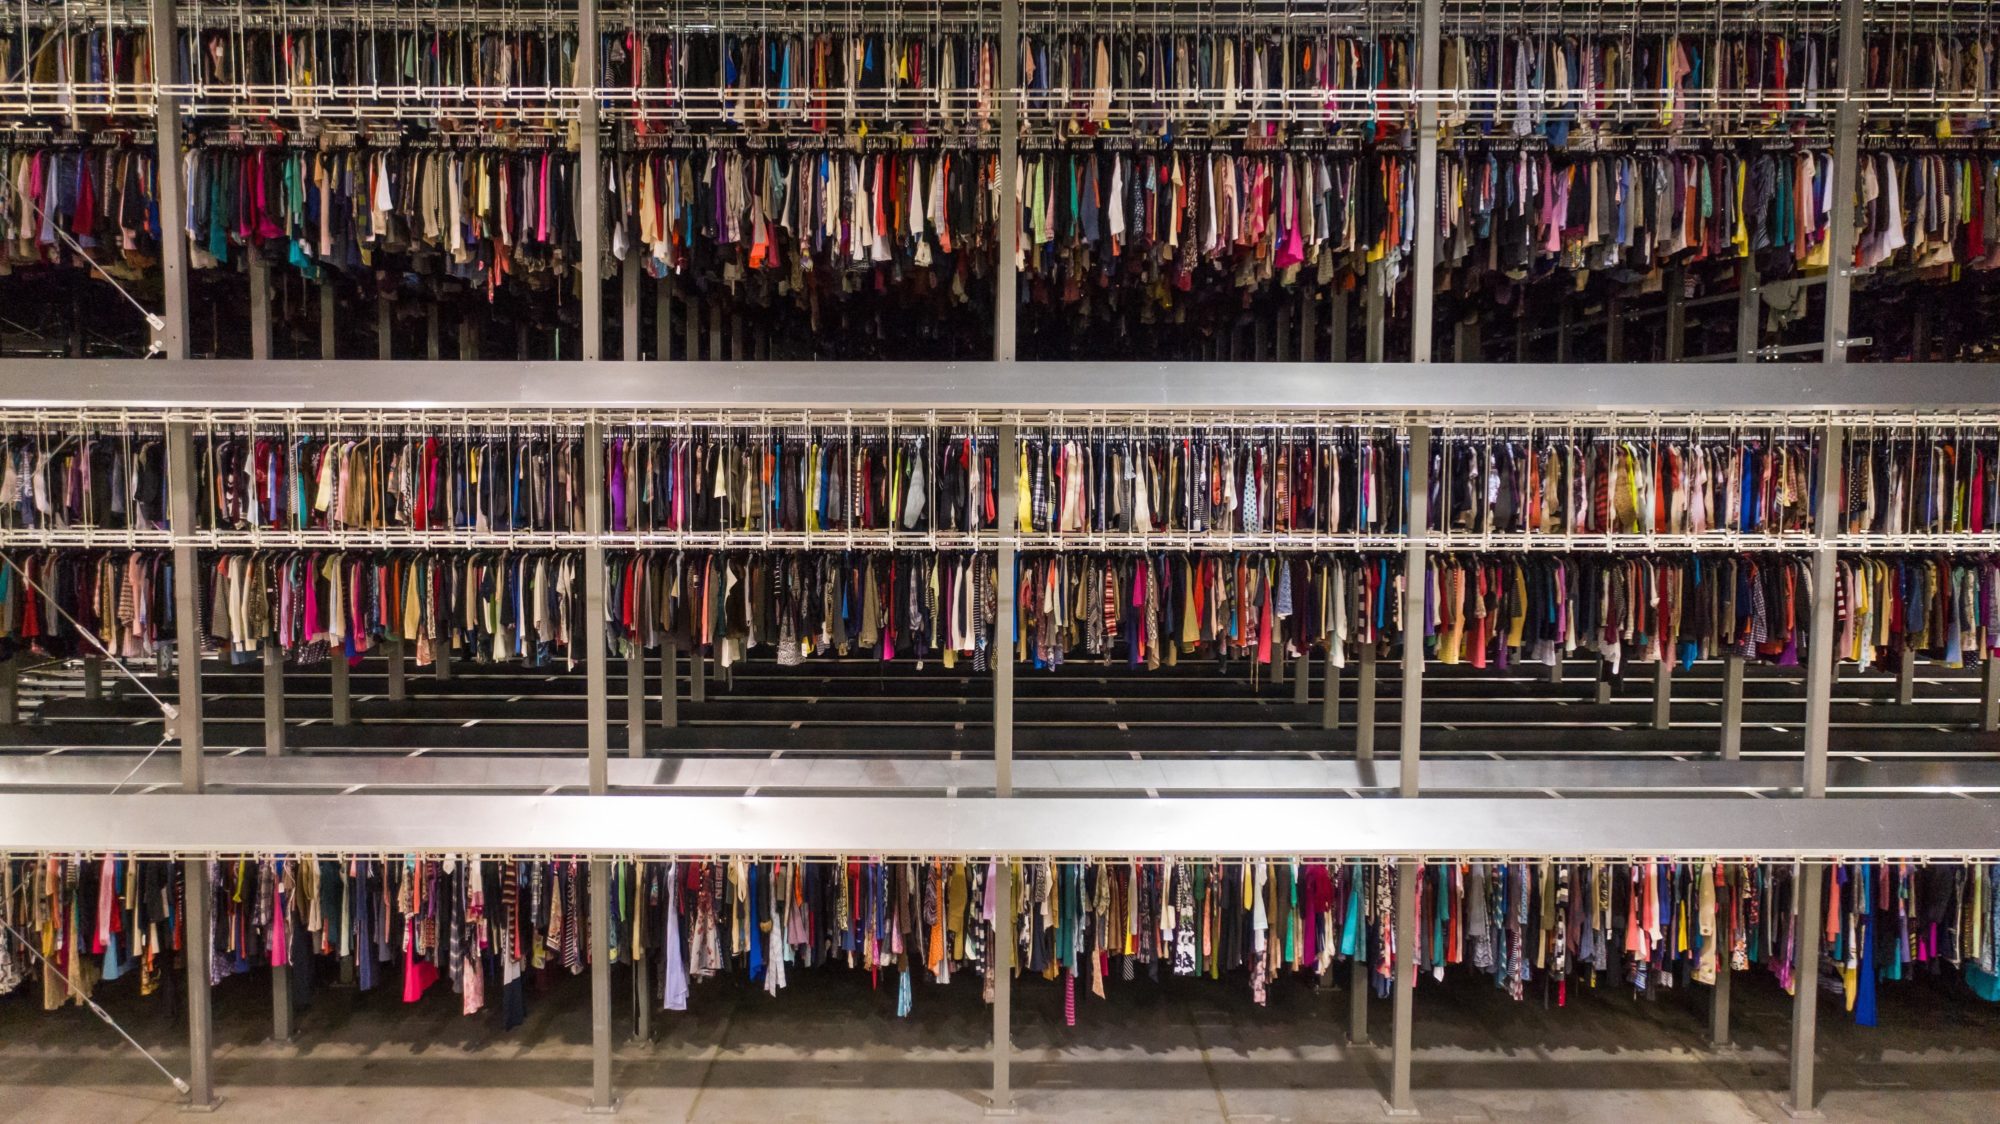 thredUp has the capacity to process 100,000 clothes items each day